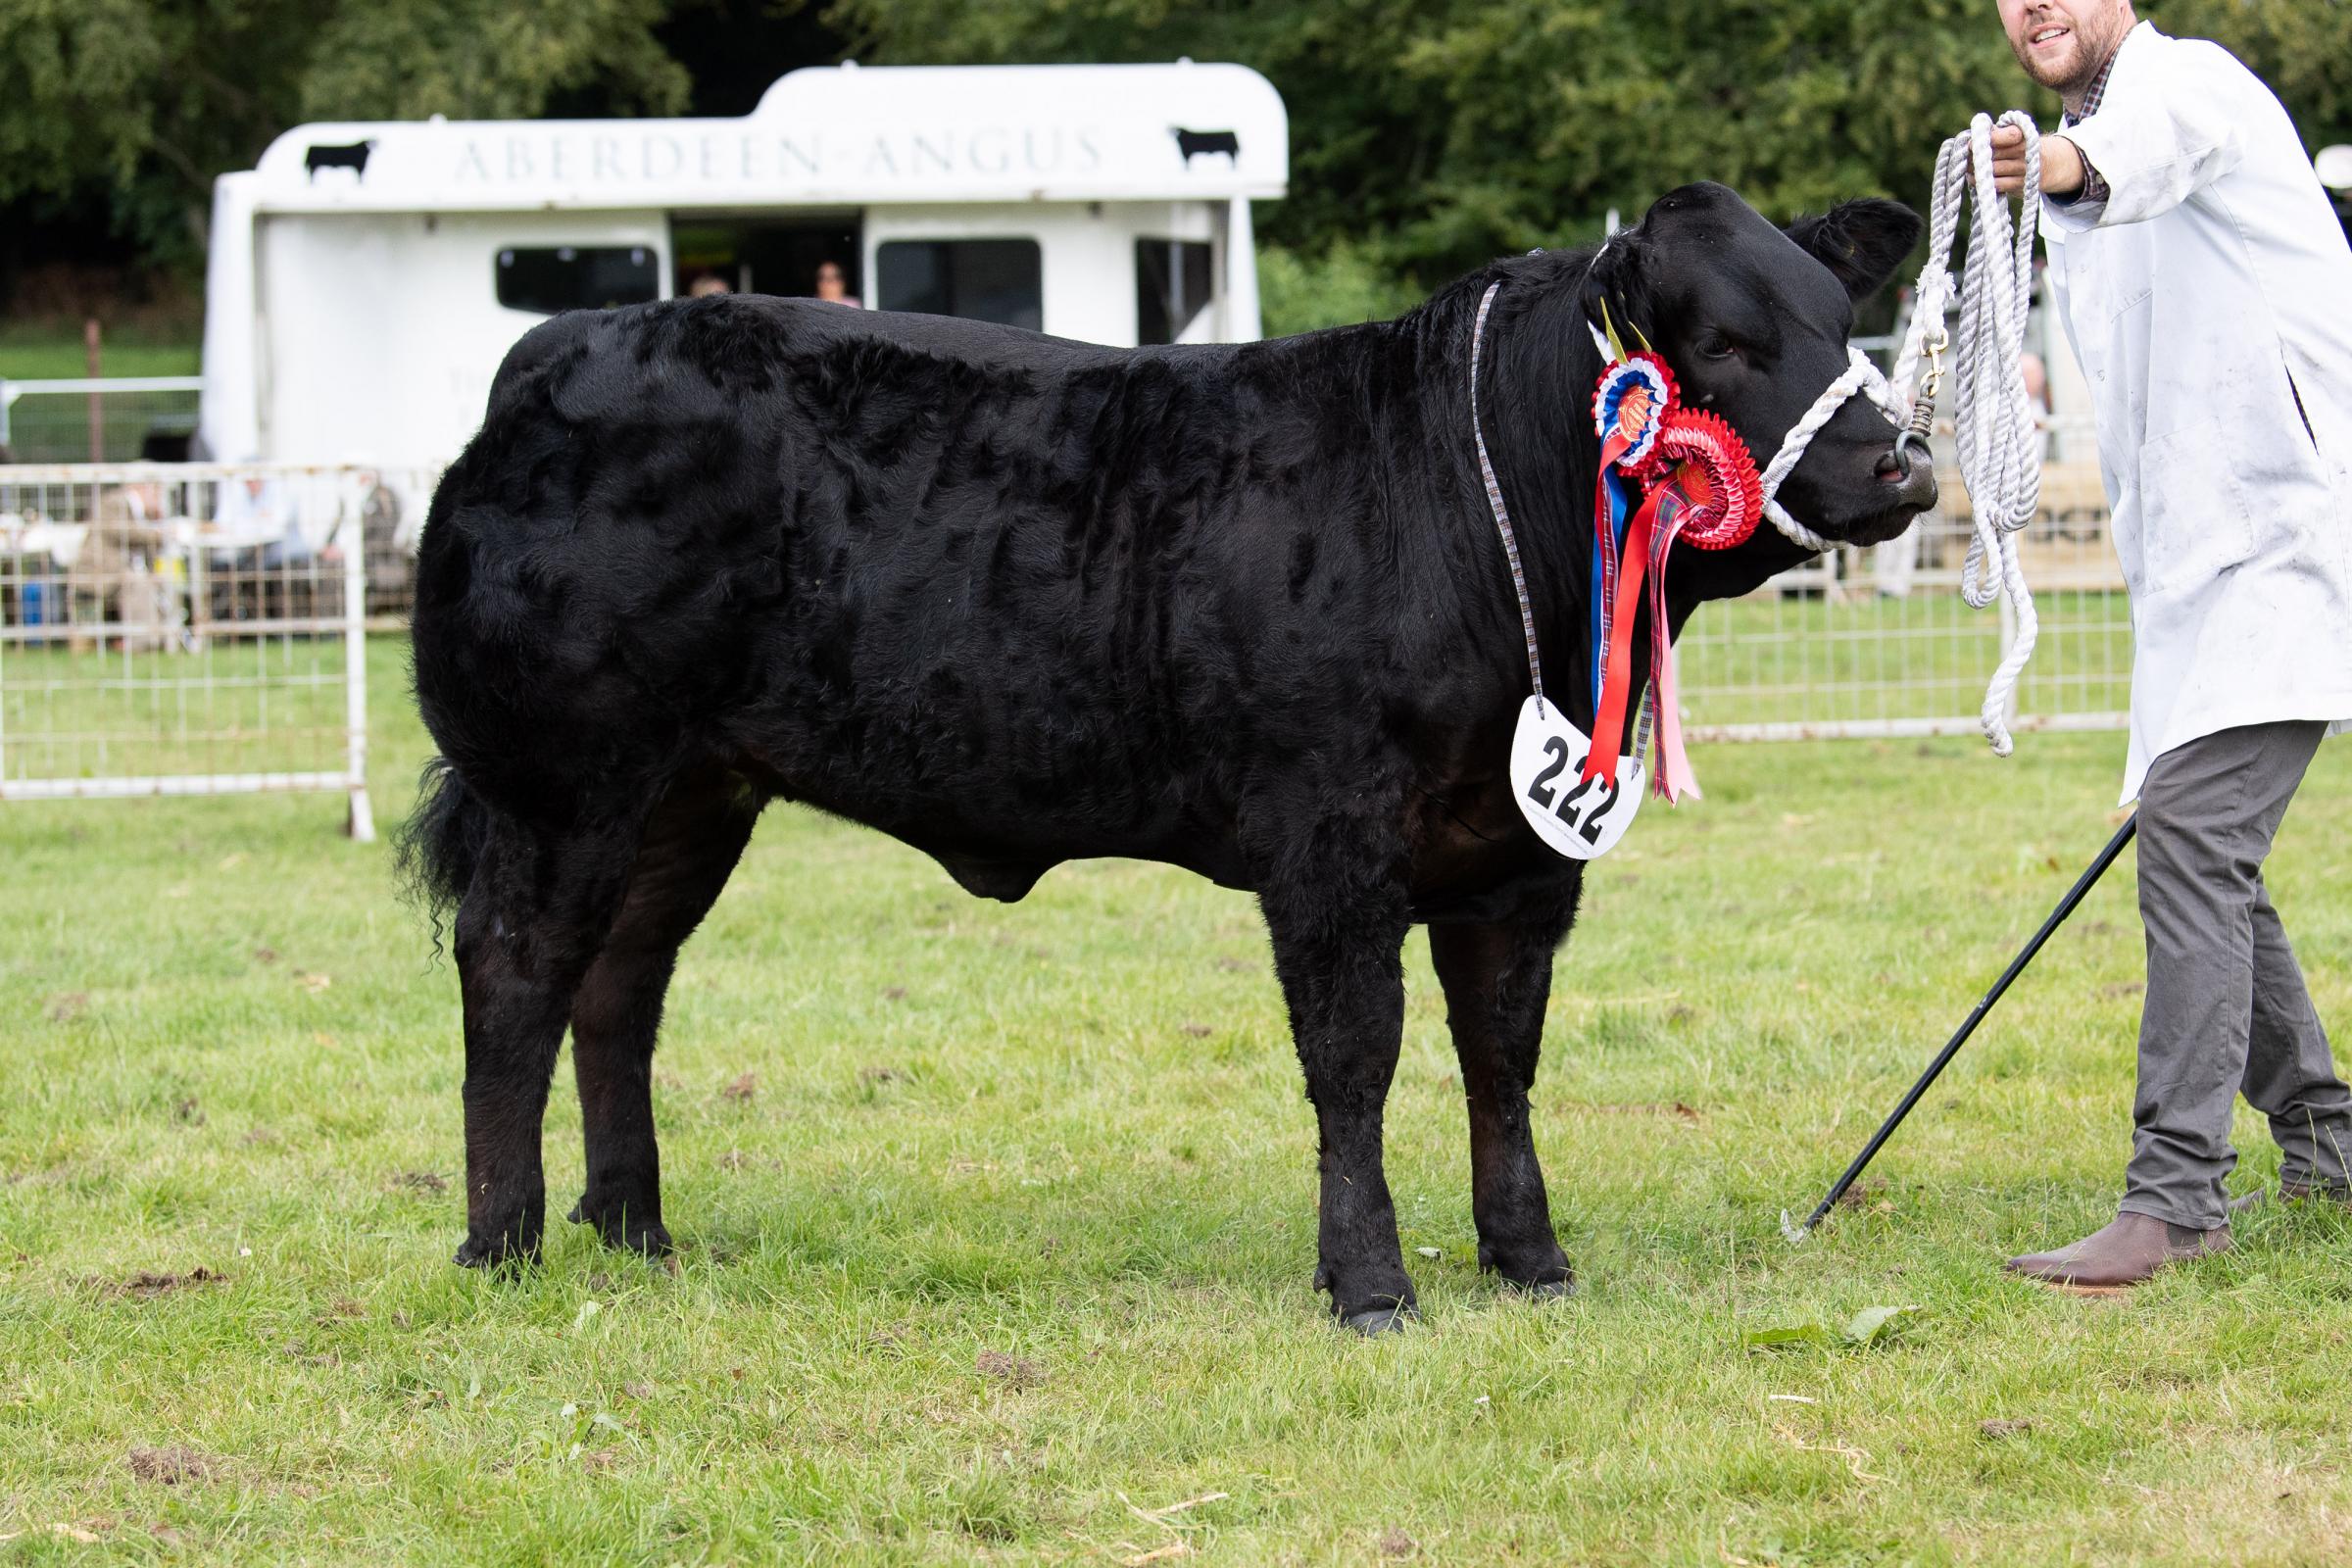 commercial cattle champion was from Mark Robertson Ref:RH010822048 Rob Haining / The Scottish Farmer...